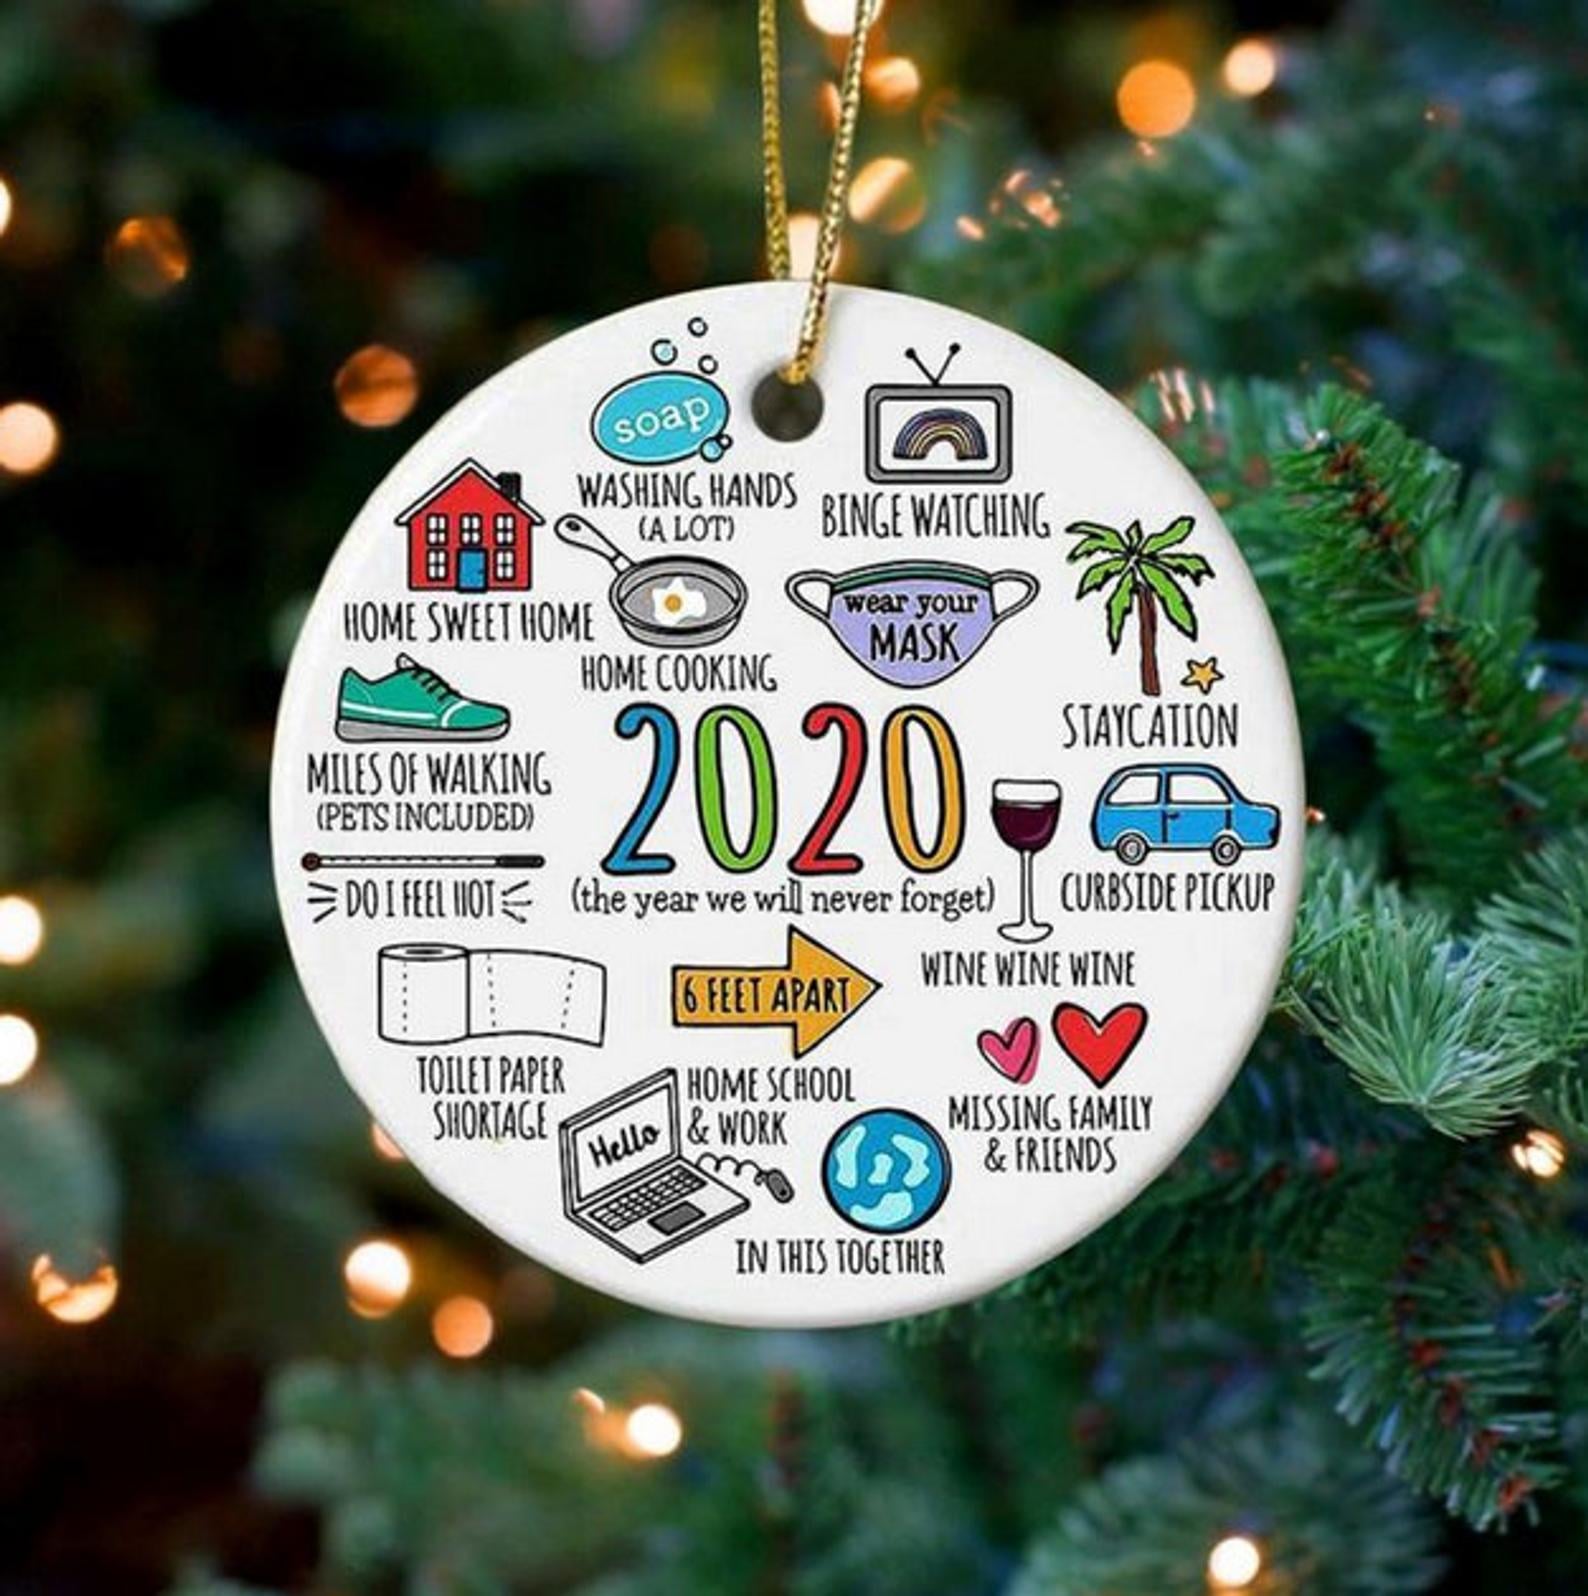 Details about   Personalized Survival Family Christmas Tree Ornament 2020  Home Quarantine gift